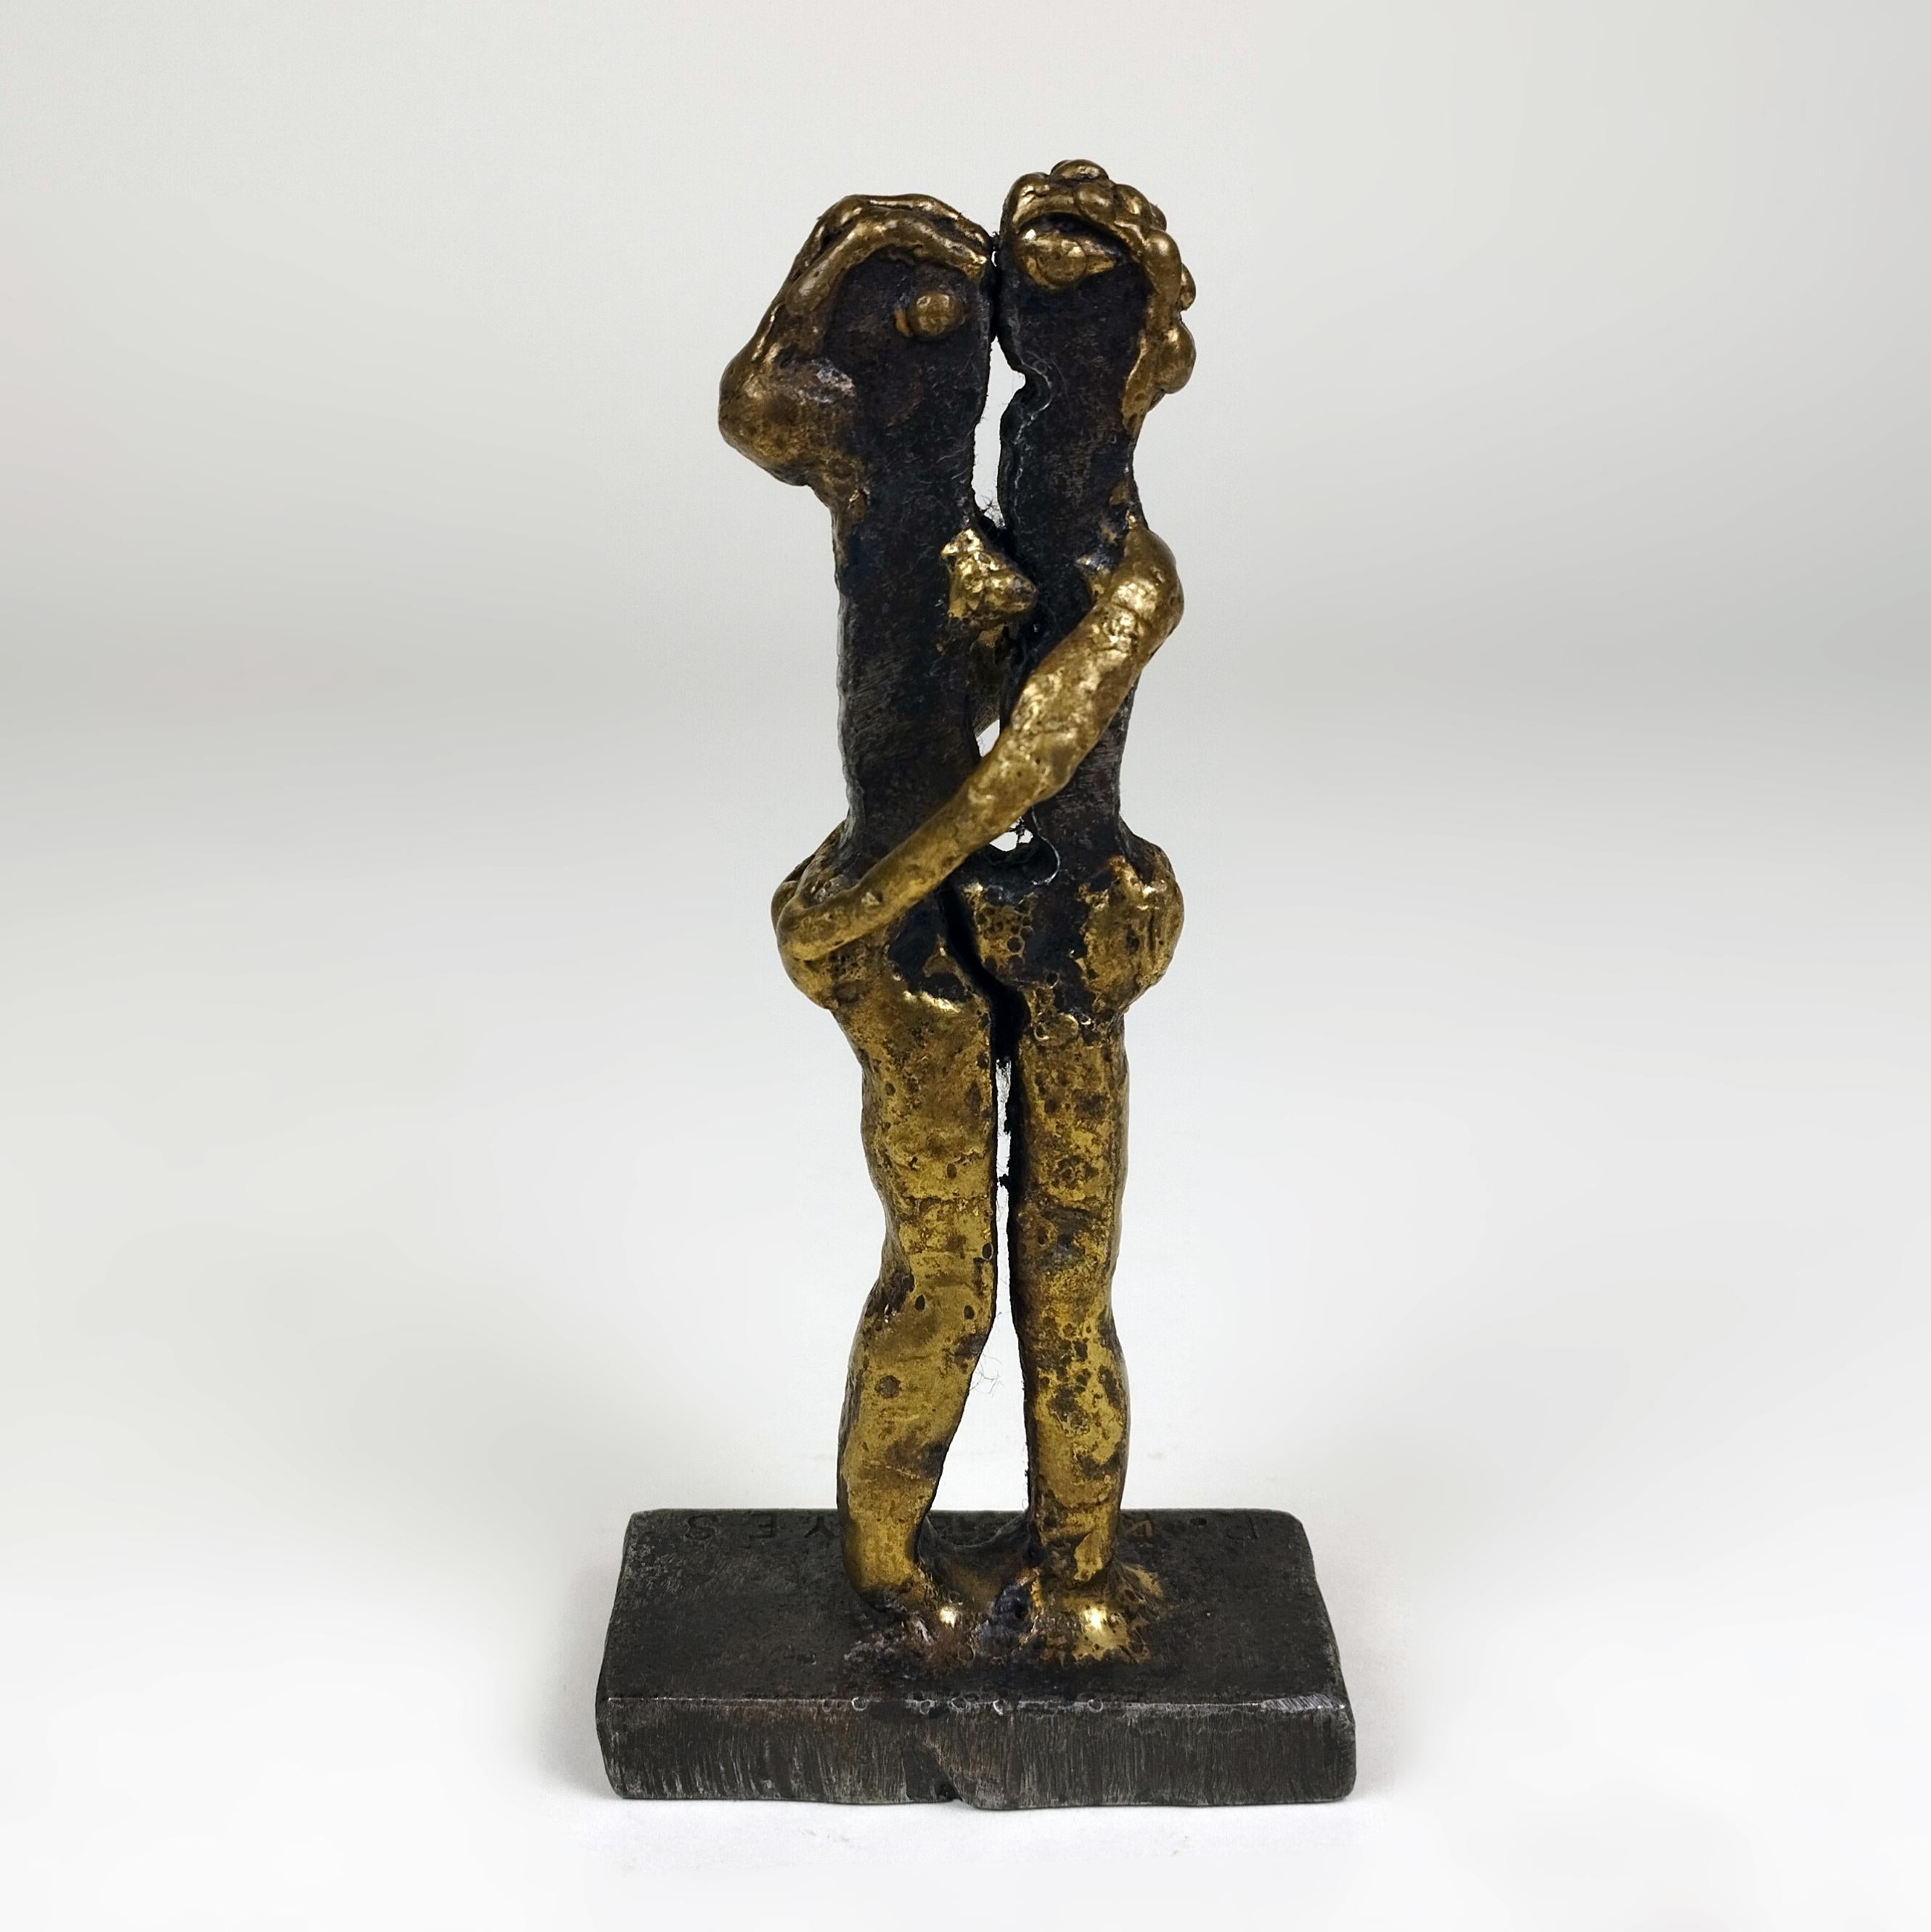 A Brutalist steel sculpture with melted bronze depicting a couple kissing by Hungarian-born Mexican sculpture Pal Kepenyes. The sculpture is signed on base.

A sculptor from Hungary who was nationalized Mexican, Pal Kepenyes (1926 - 2021) resided in